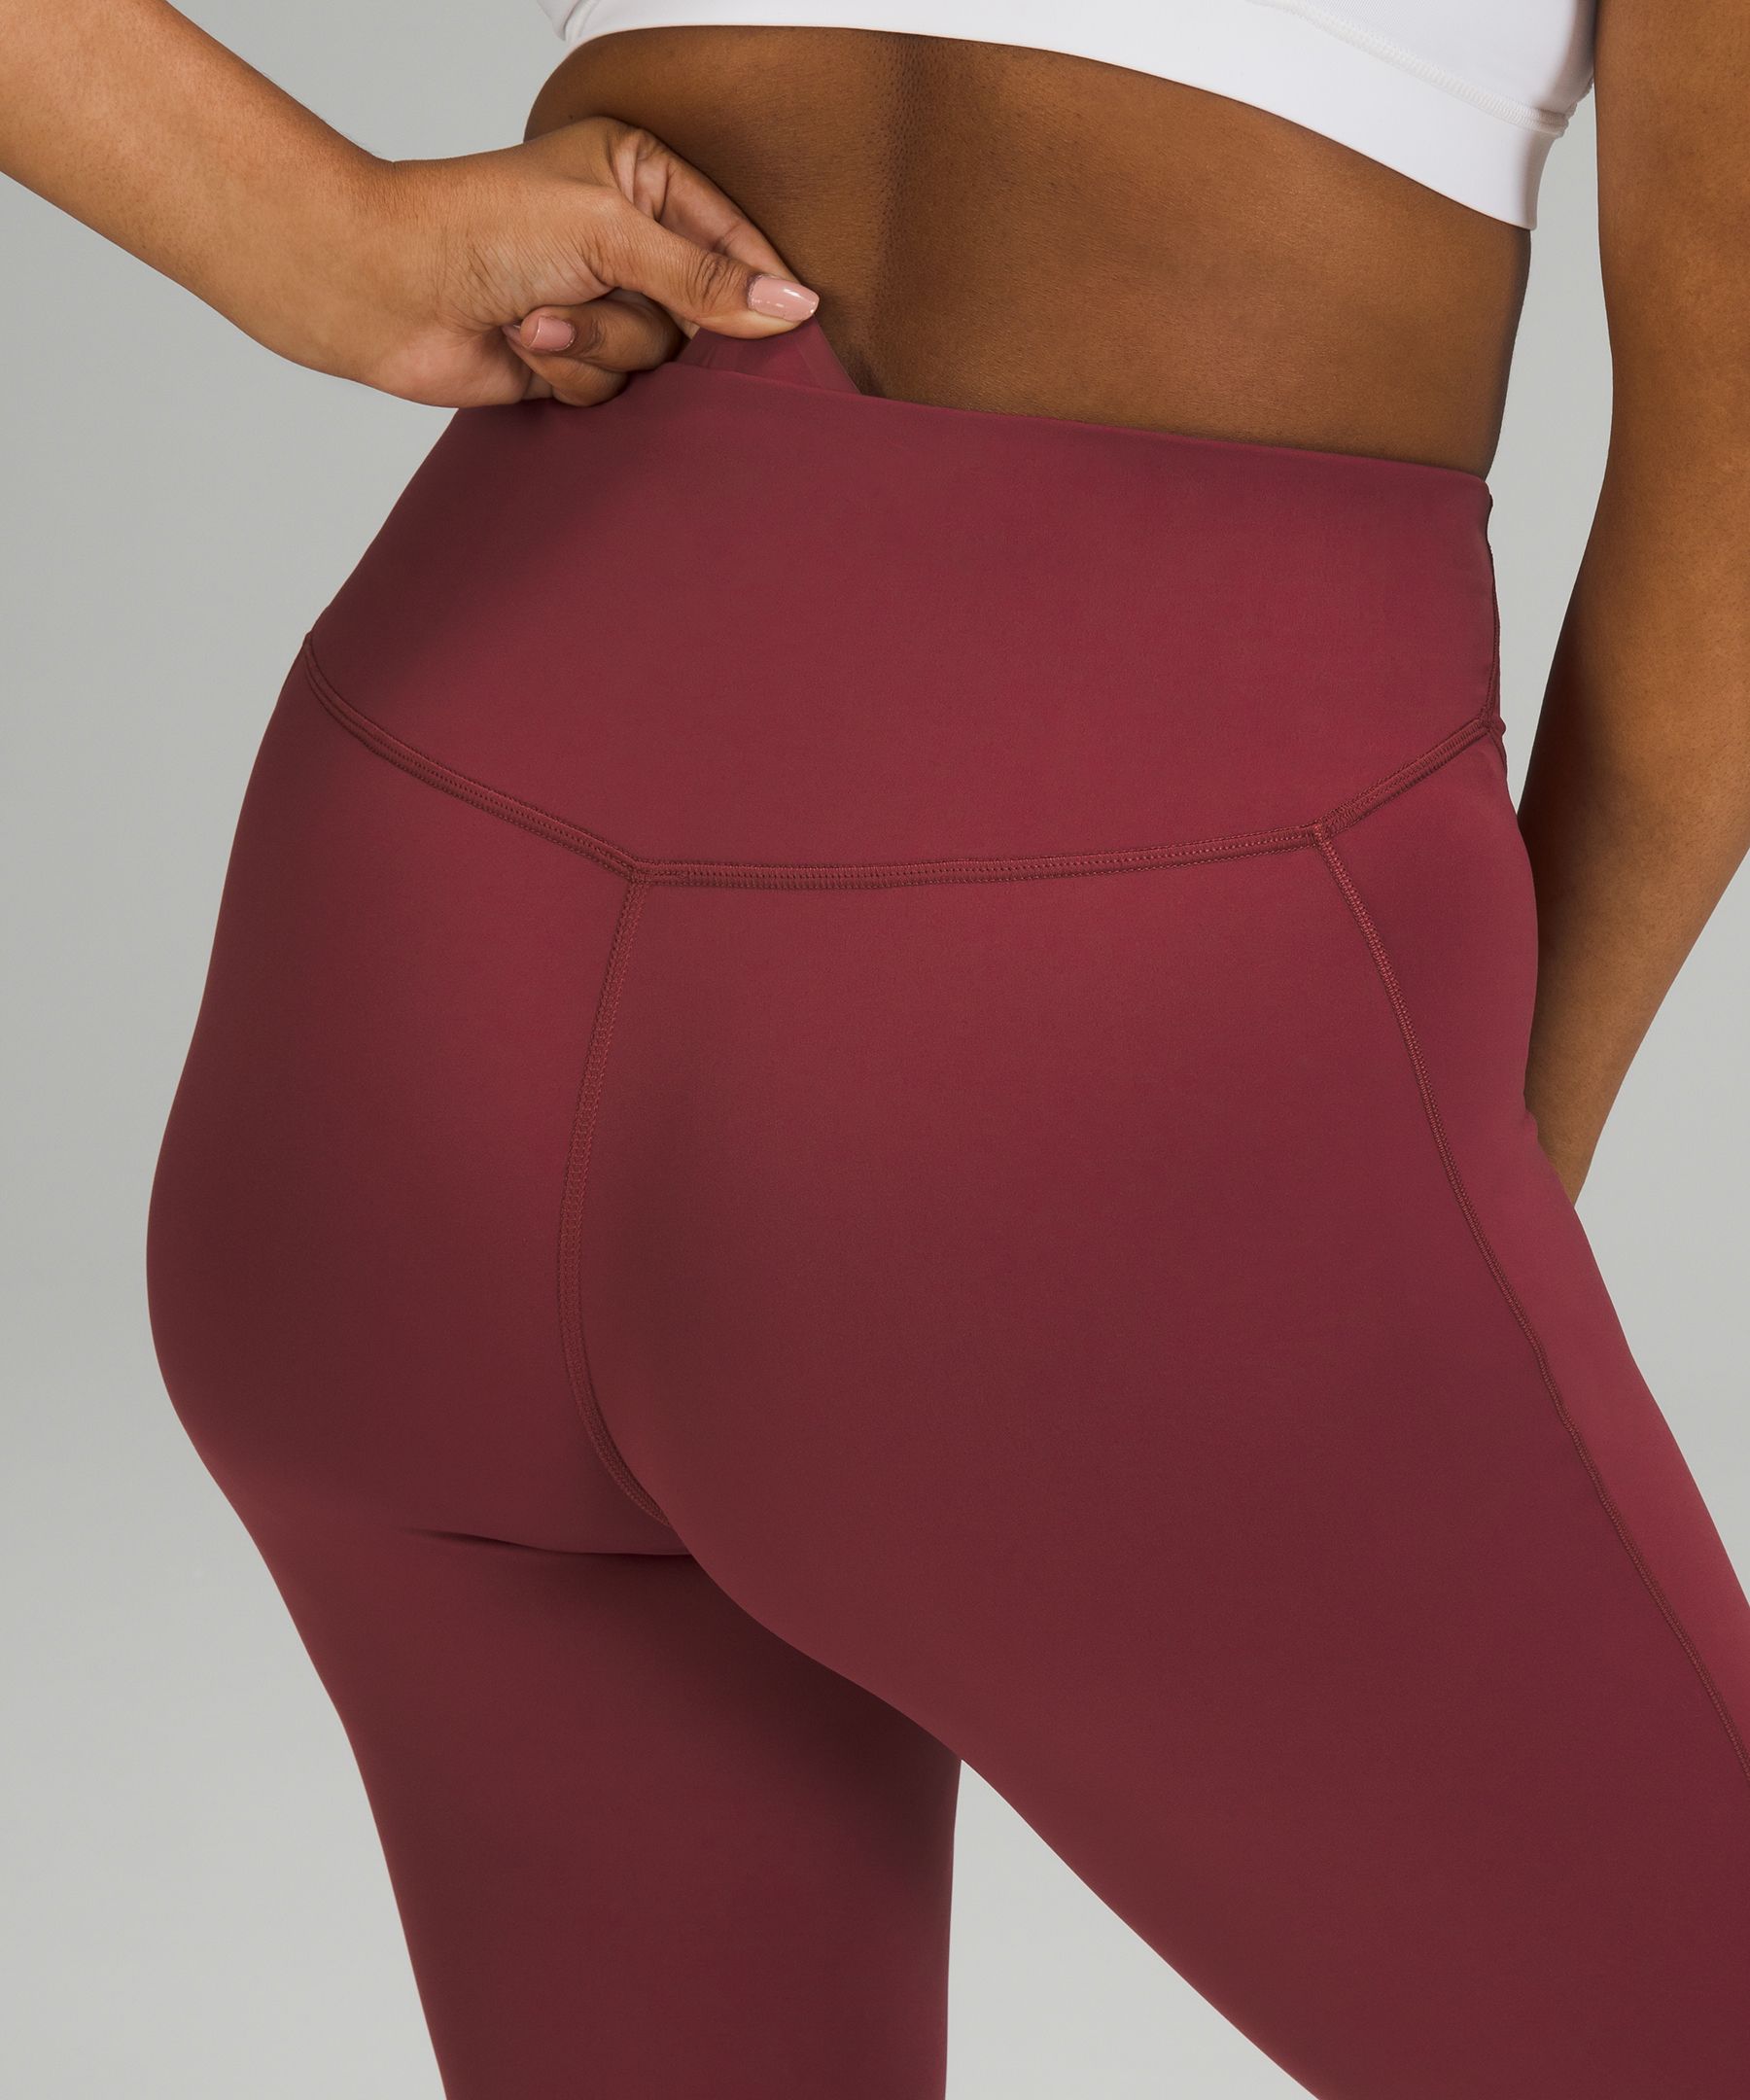 Lululemon Base Pace High-Rise Tight 25" *Online Only. 5